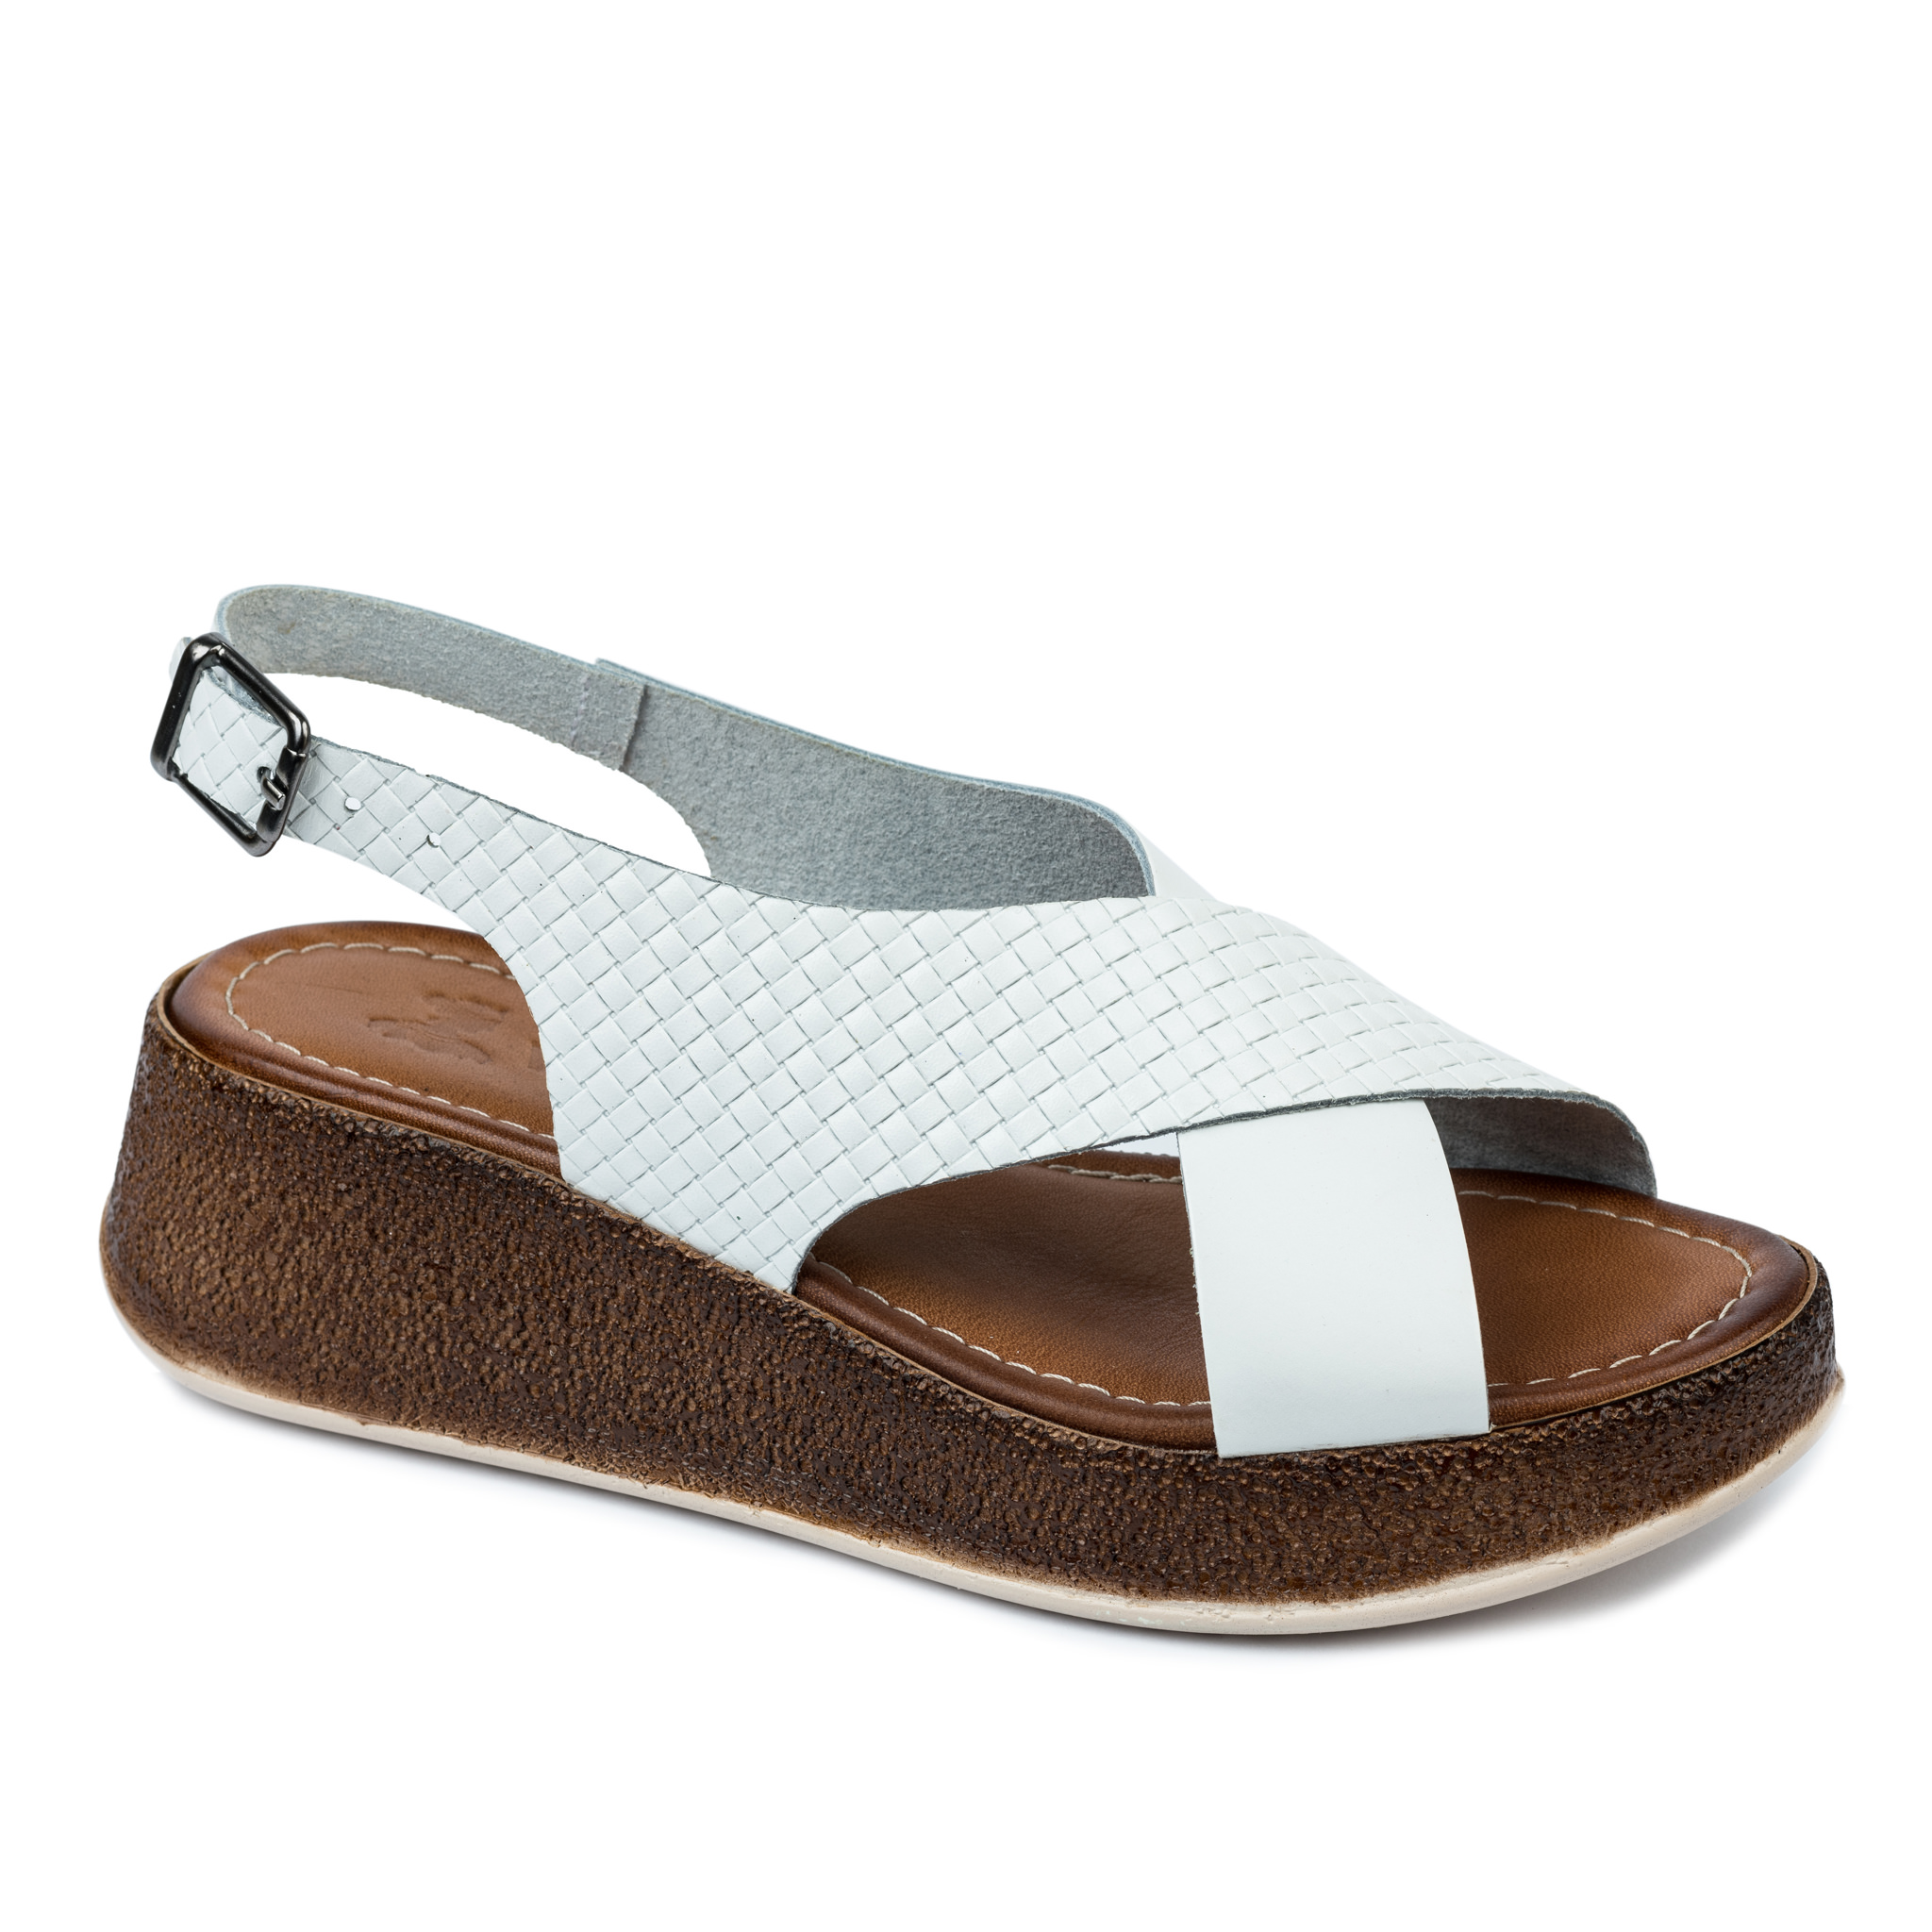 Leather sandals A647 - WHITE